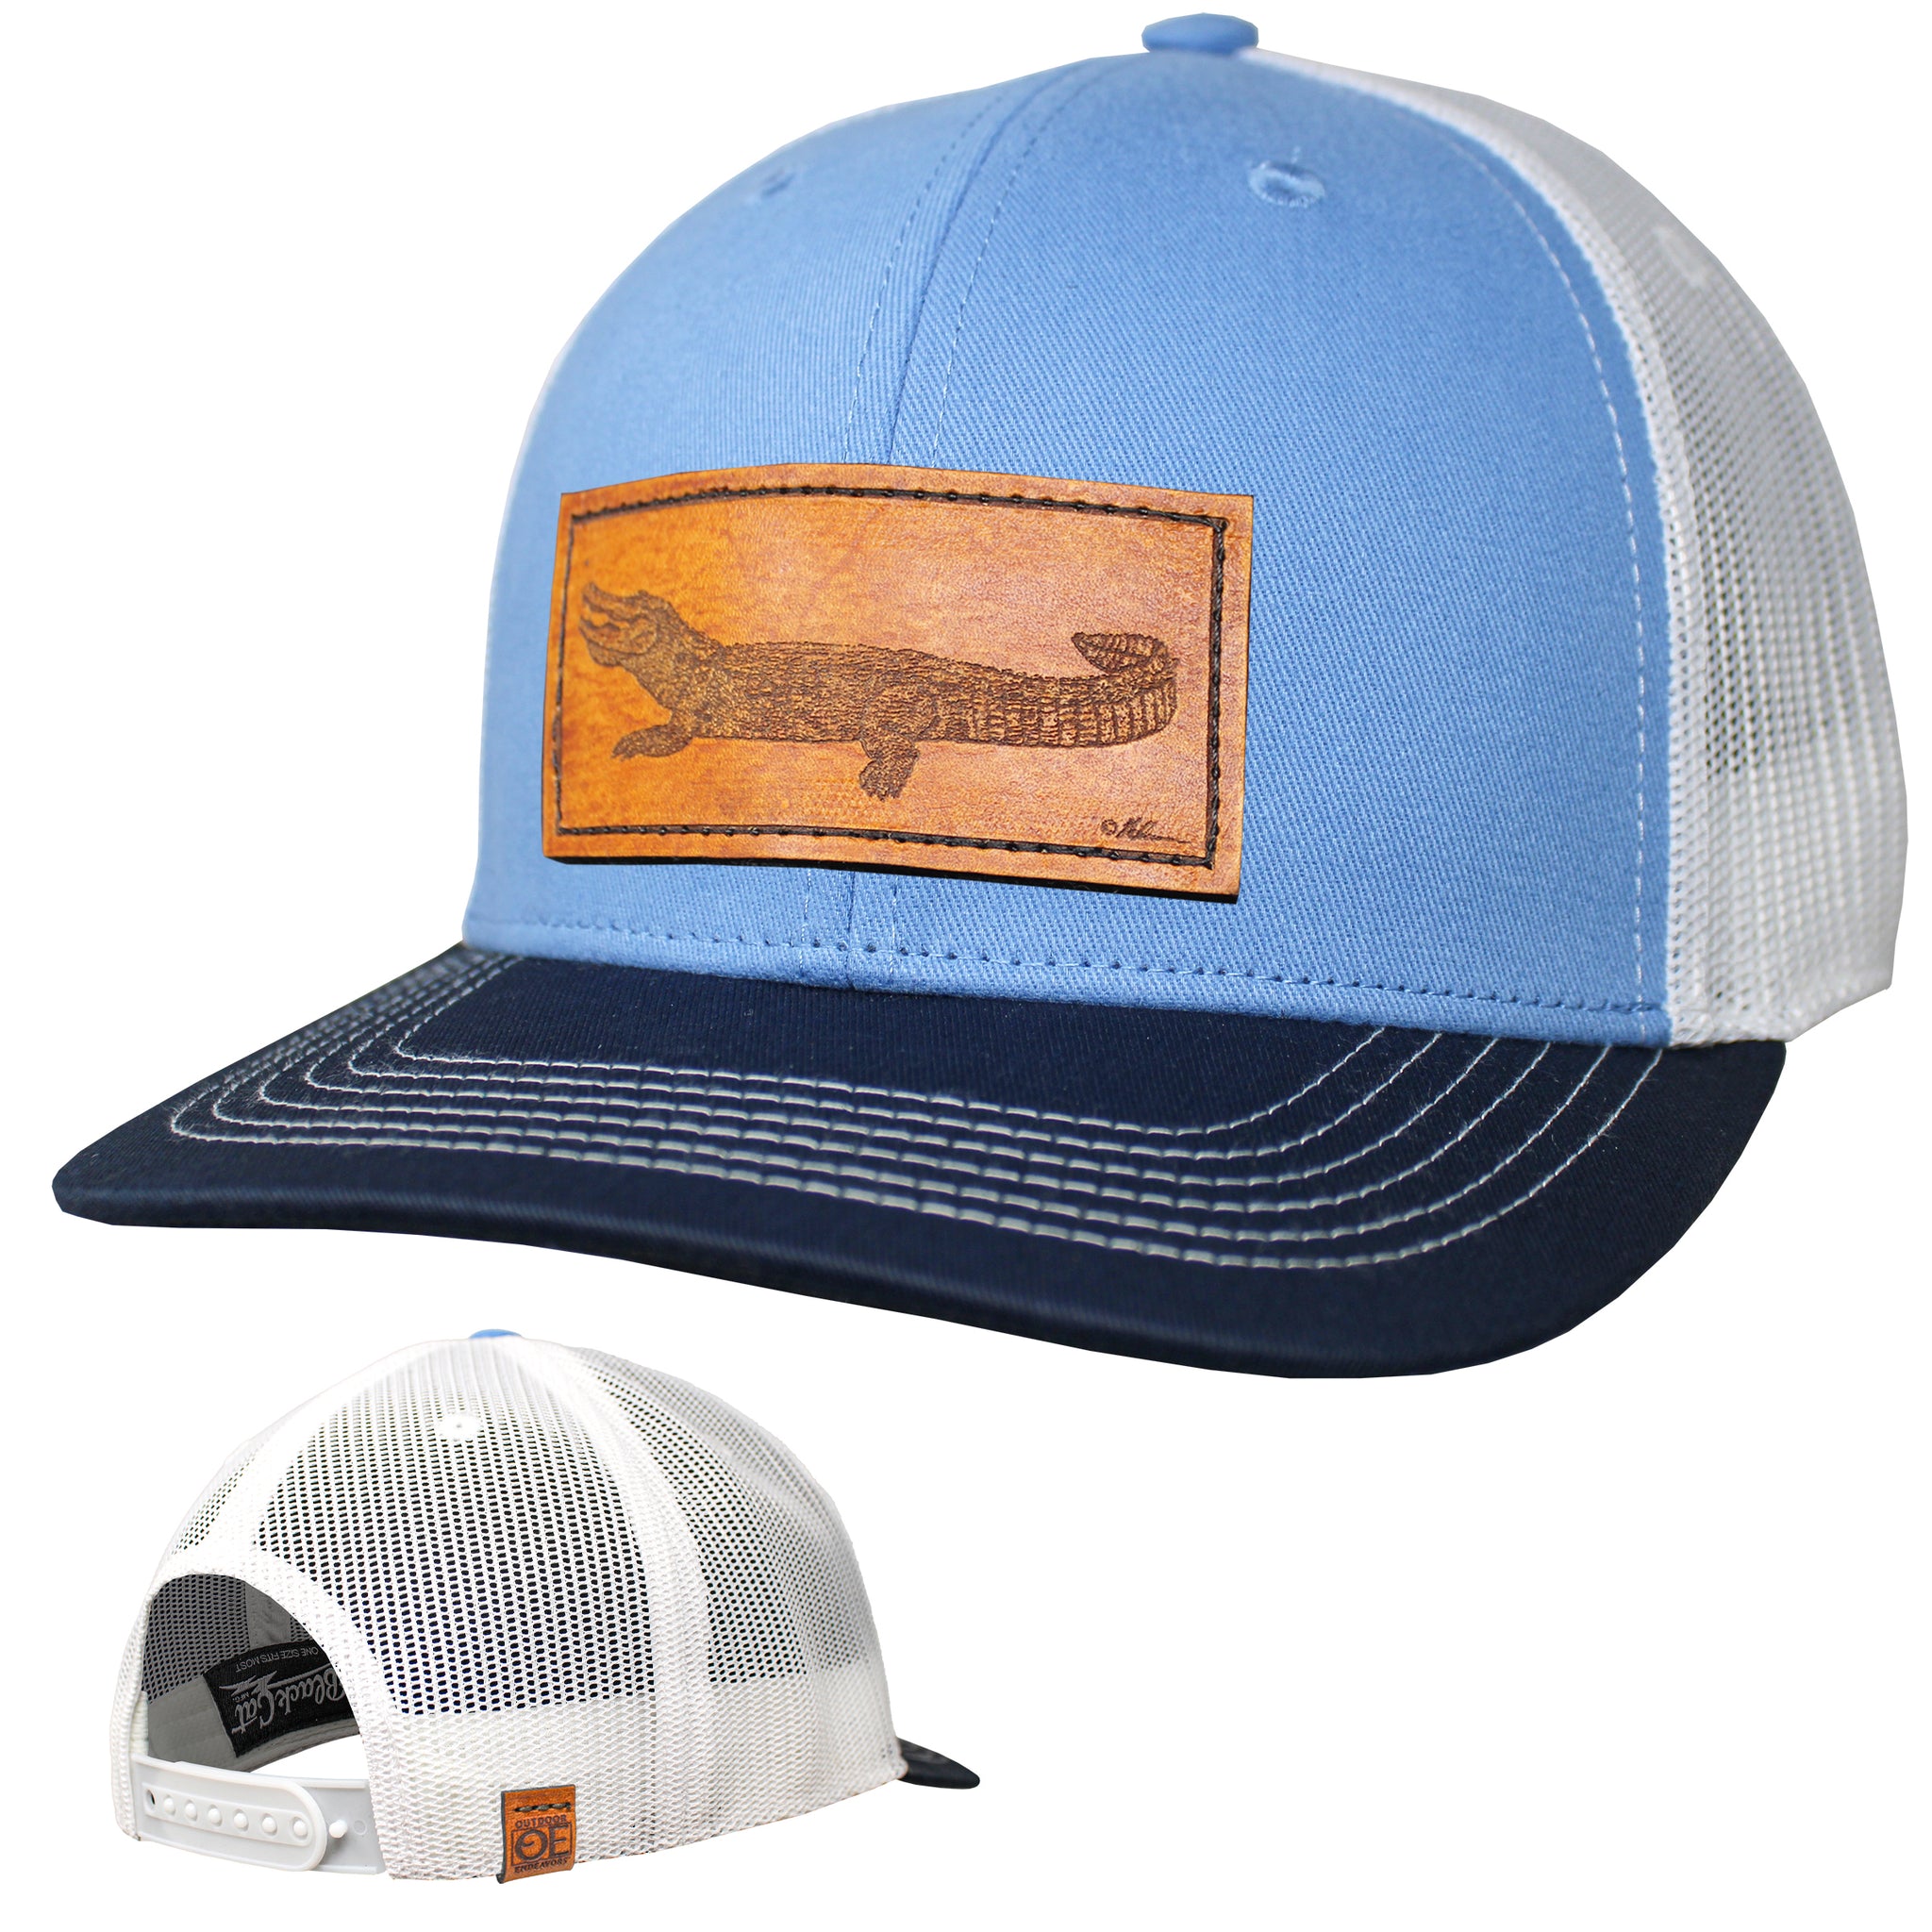 OE - Performance Trucker Hat - Gator Leather Patch